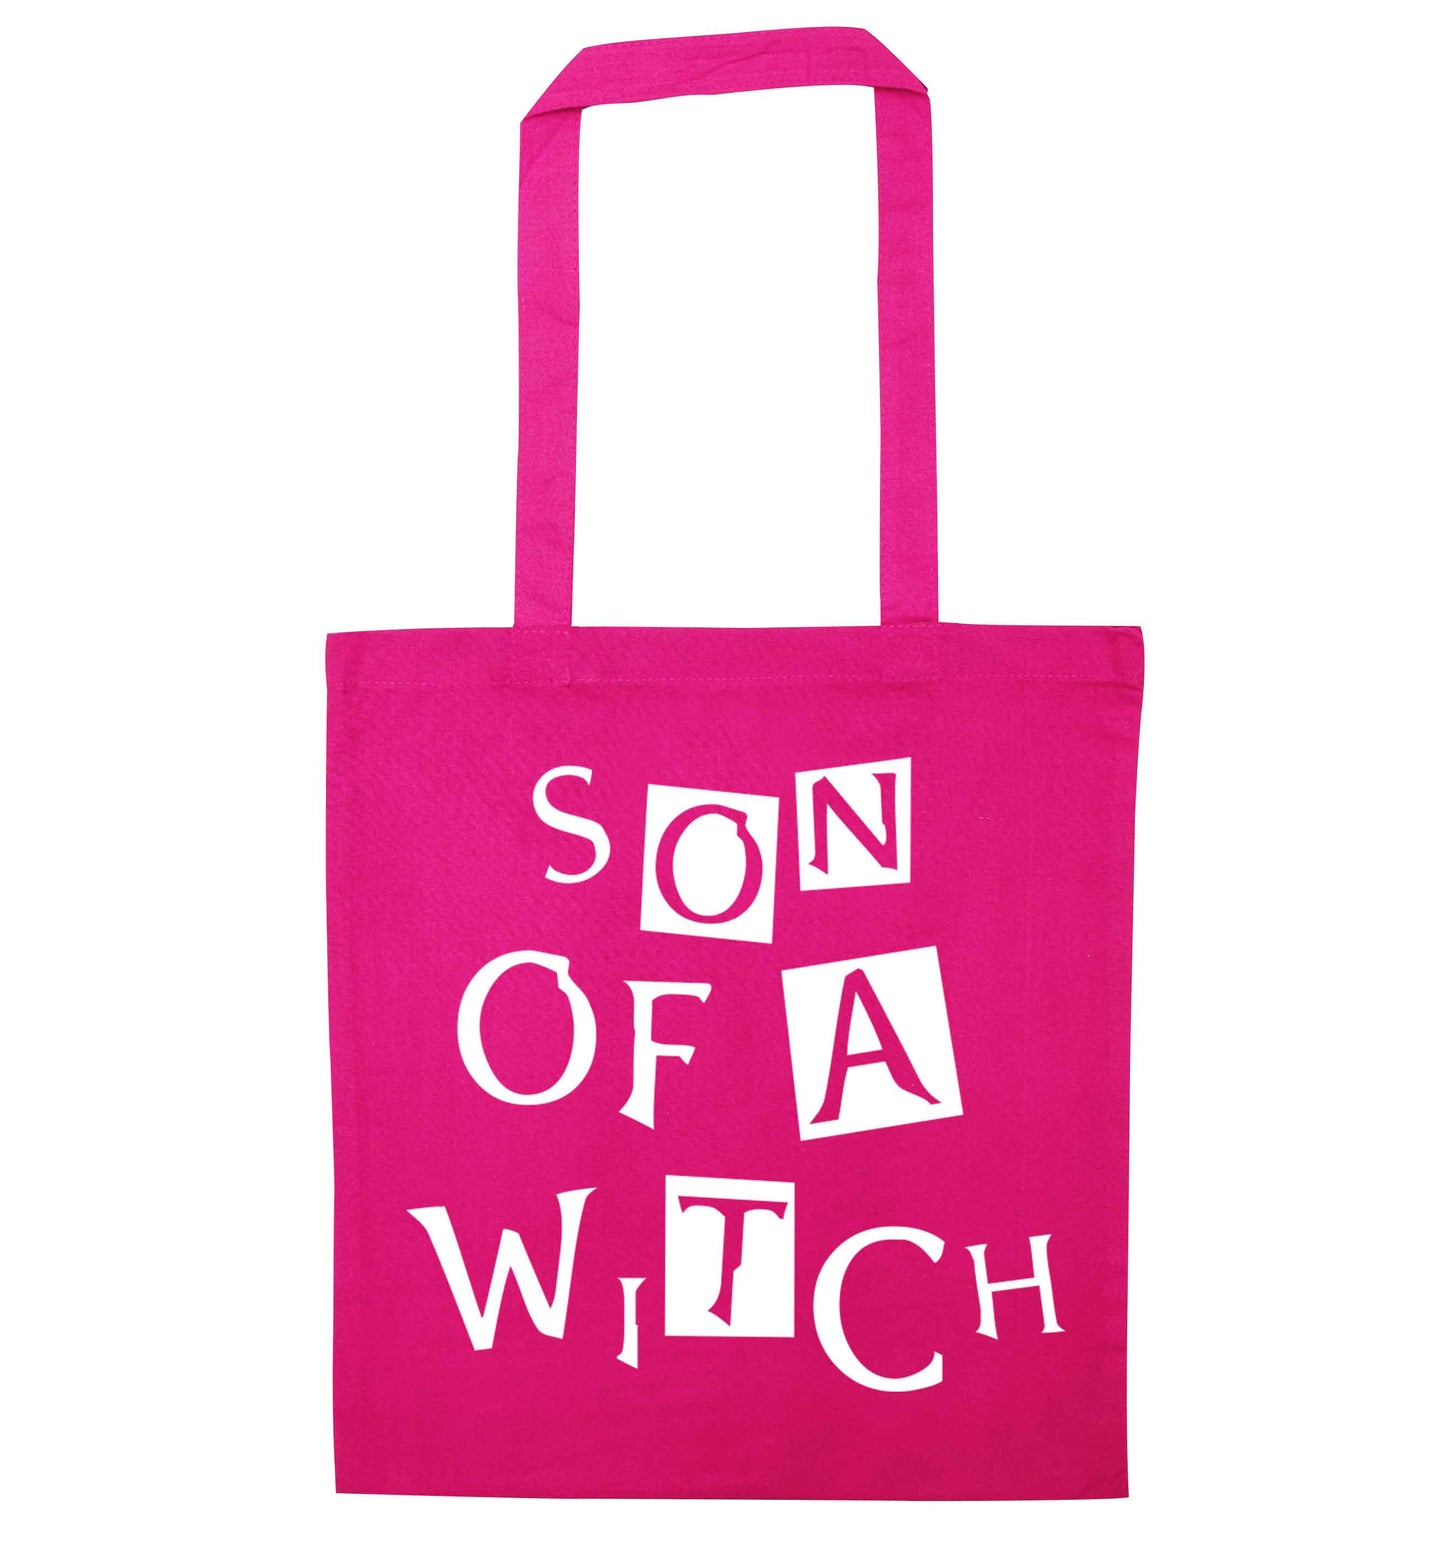 Son of a witch pink tote bag